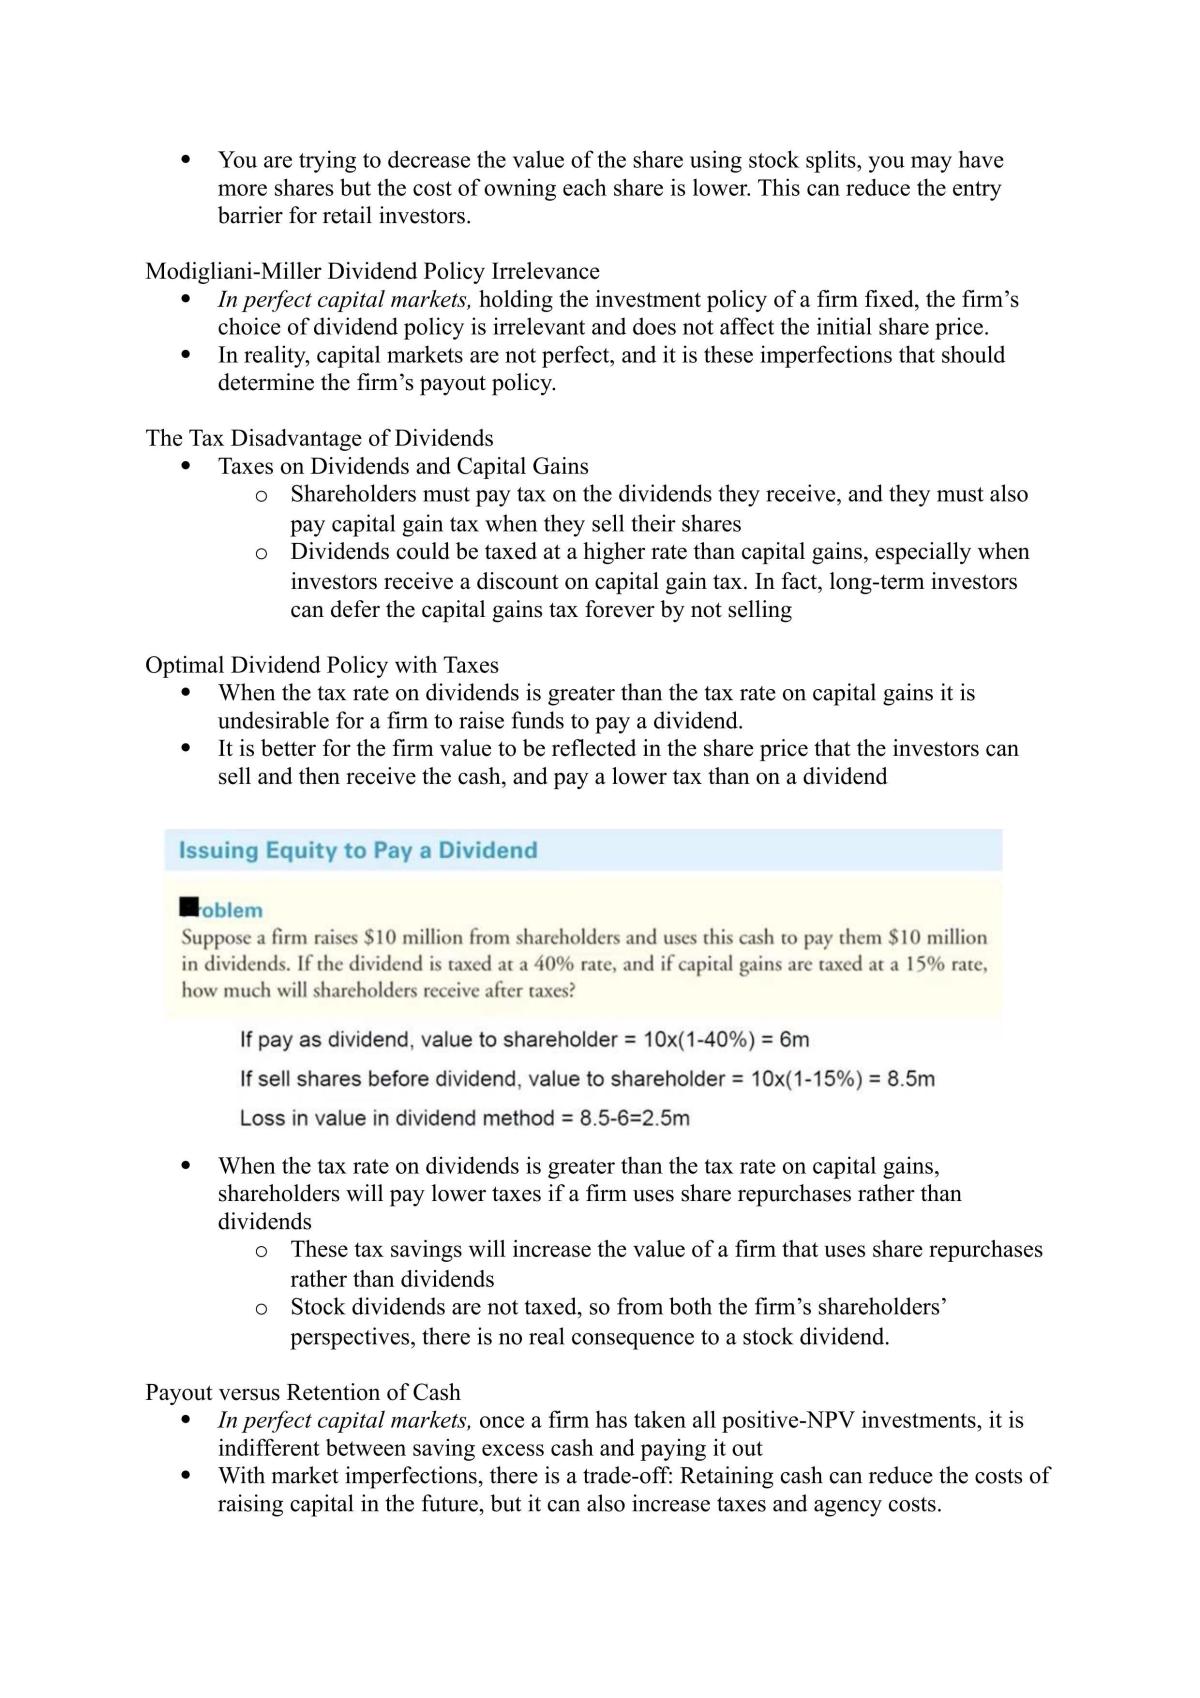 Corporate Finance Revision Guide - Page 57